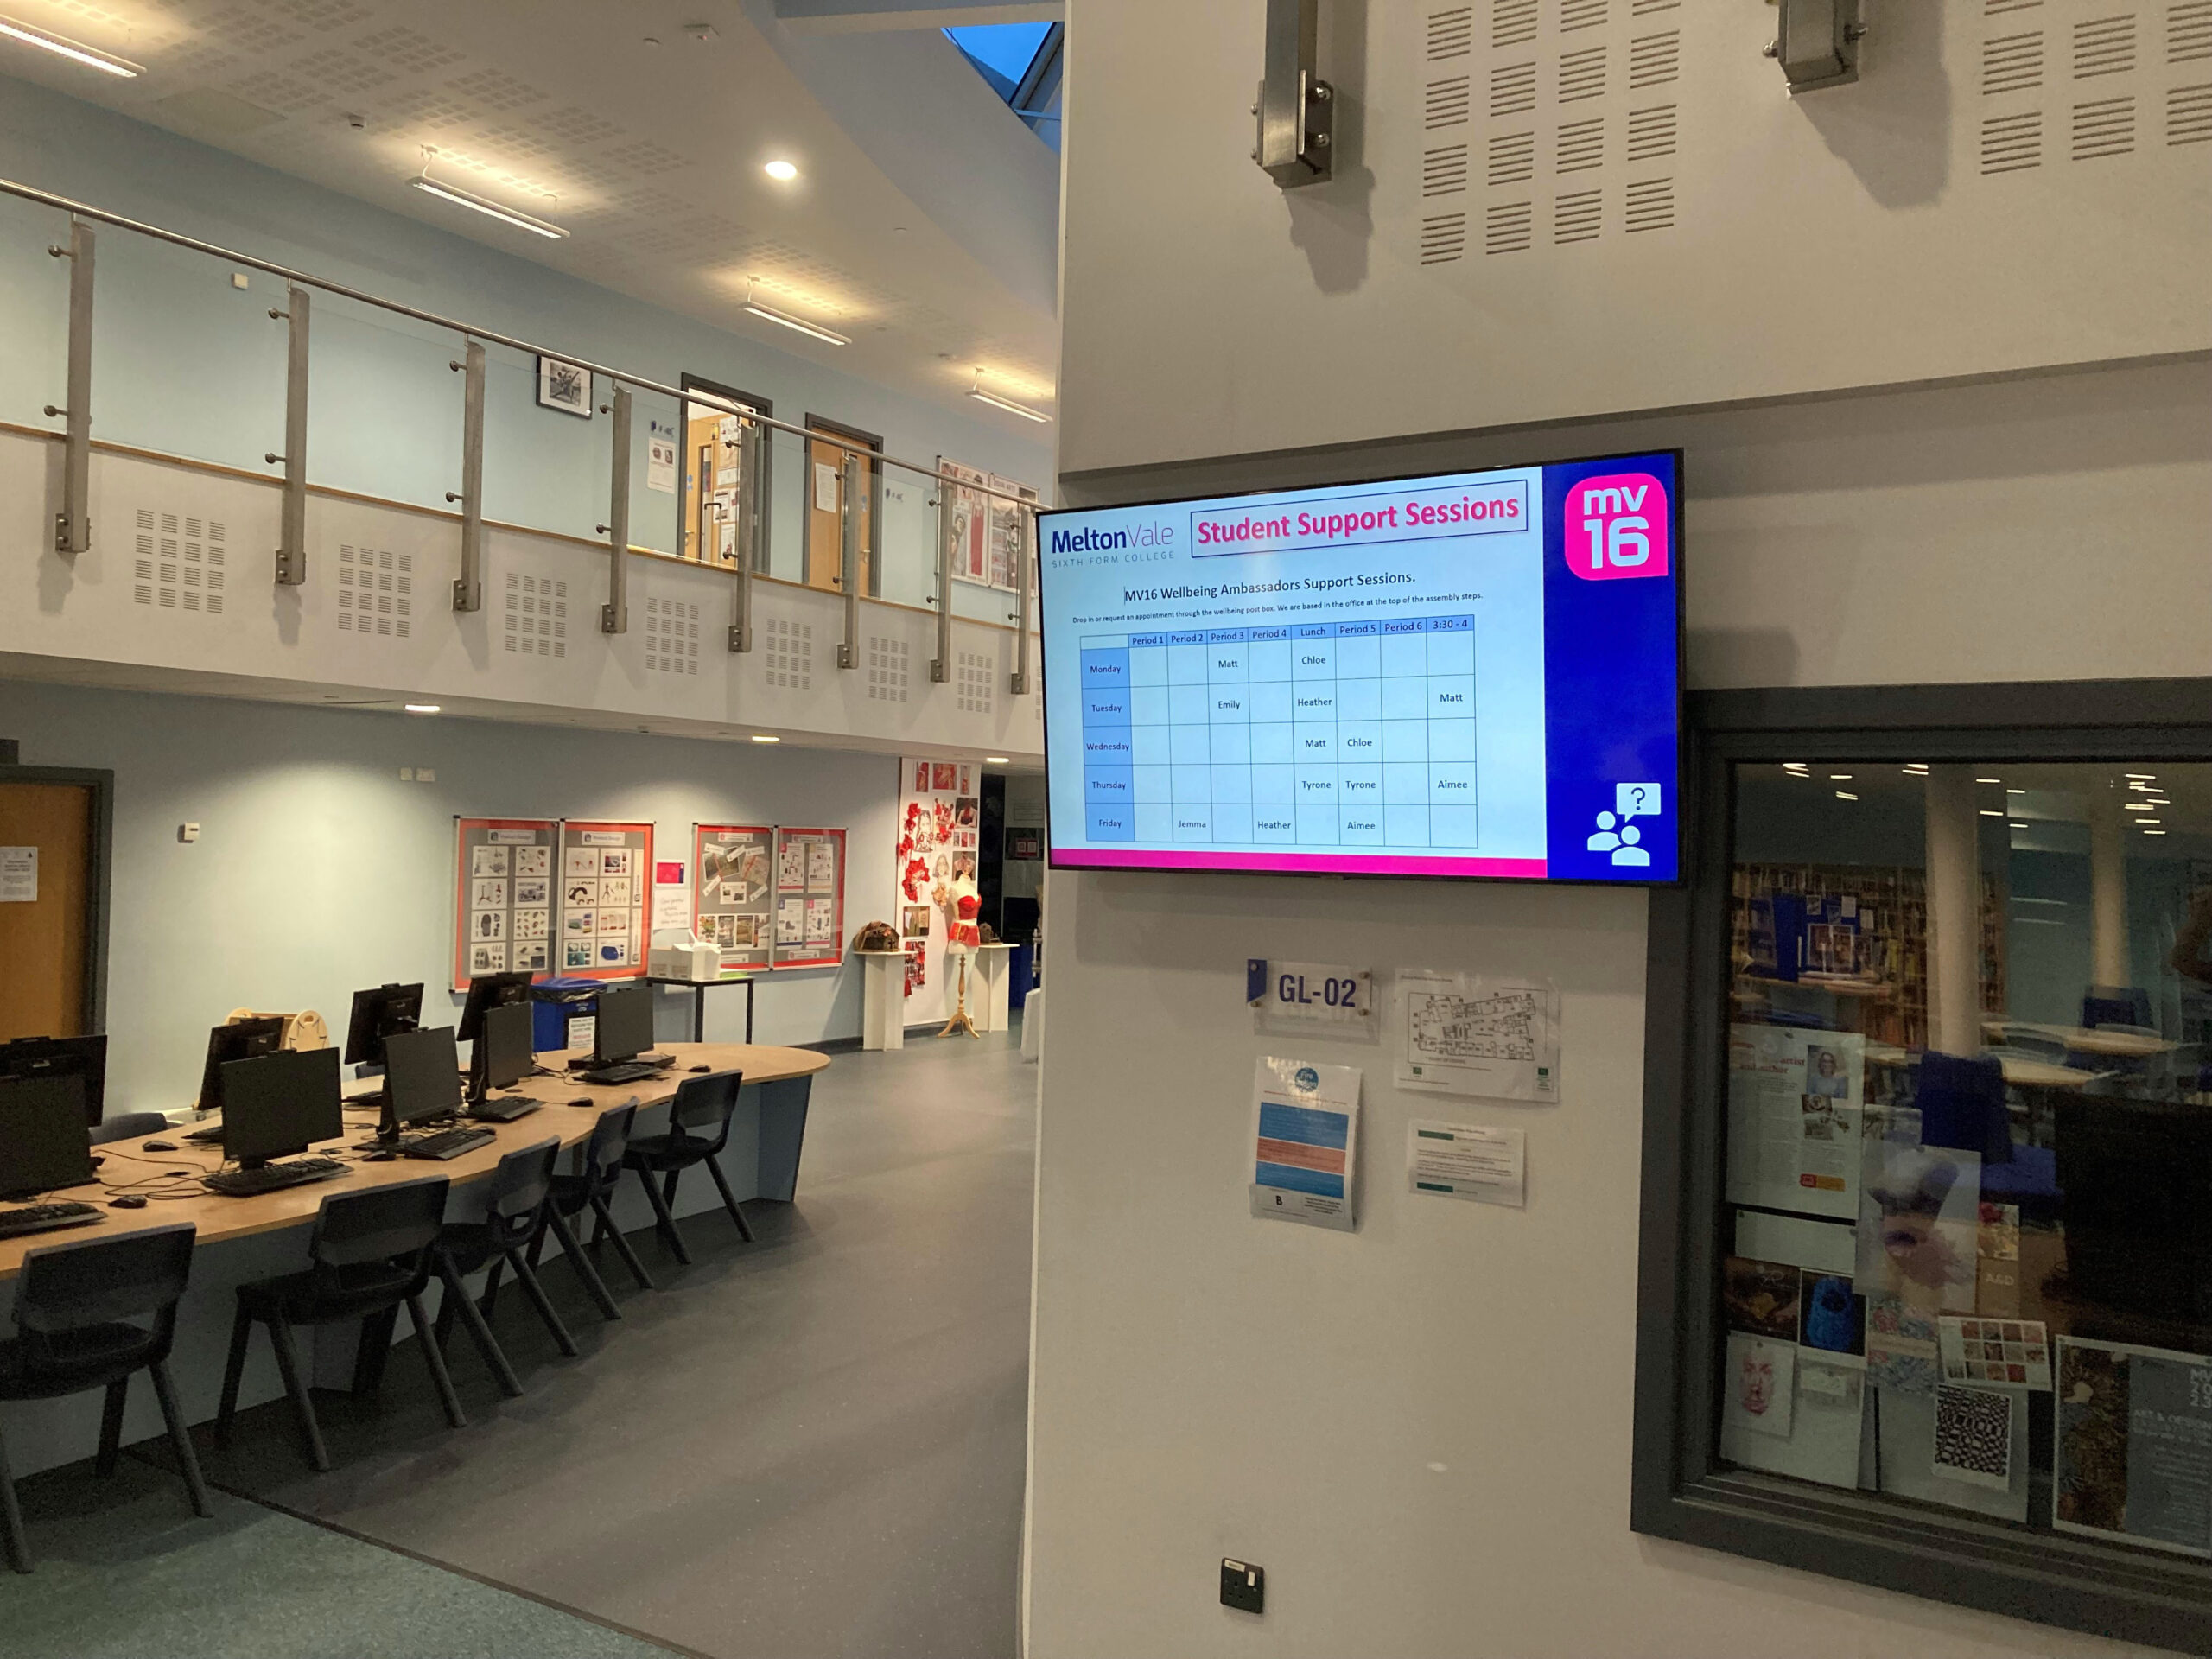 A school hallway with a digital display showing a school schedule hanging from the wall.